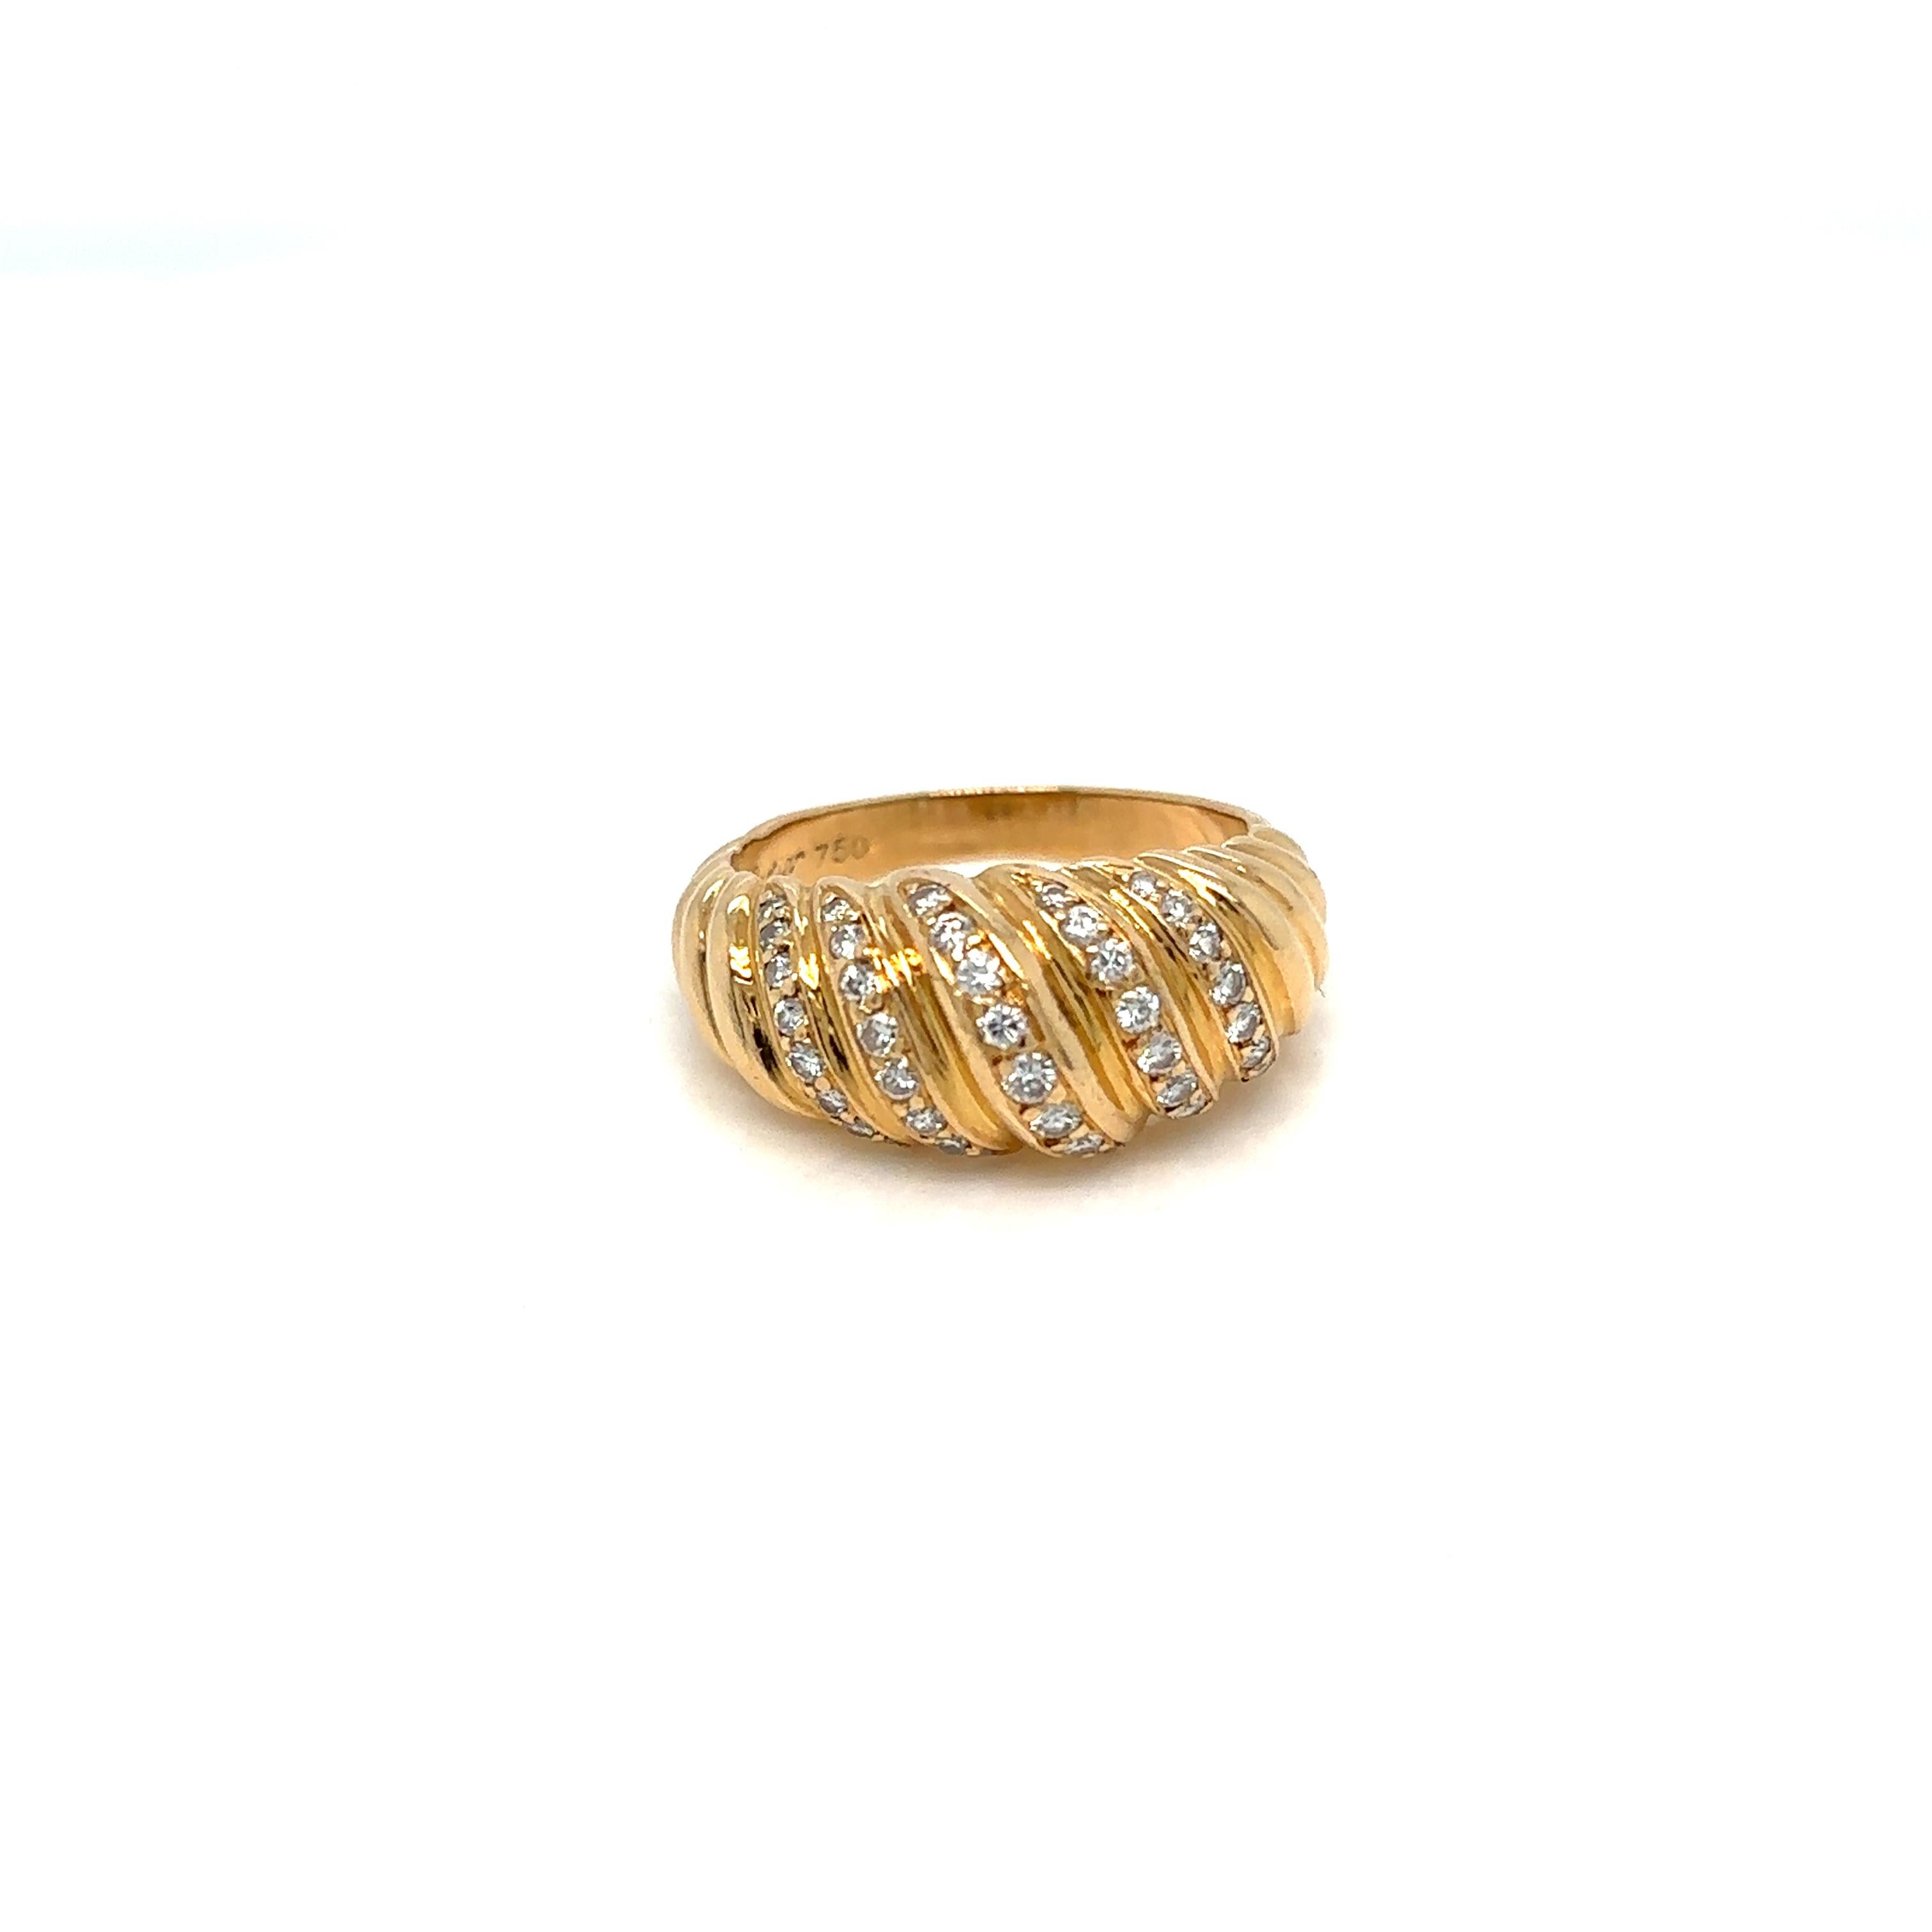 Cartier Diamond Ring in 18ct yellow gold and set with round brilliant cut diamonds, 5 lines total .70 ct F color IF. Vintage, circa 1980

Signed Cartier 750, numbered, eagle and goldsmith head punch on the outer ring.

Weight 6,6 grams
Size 7,